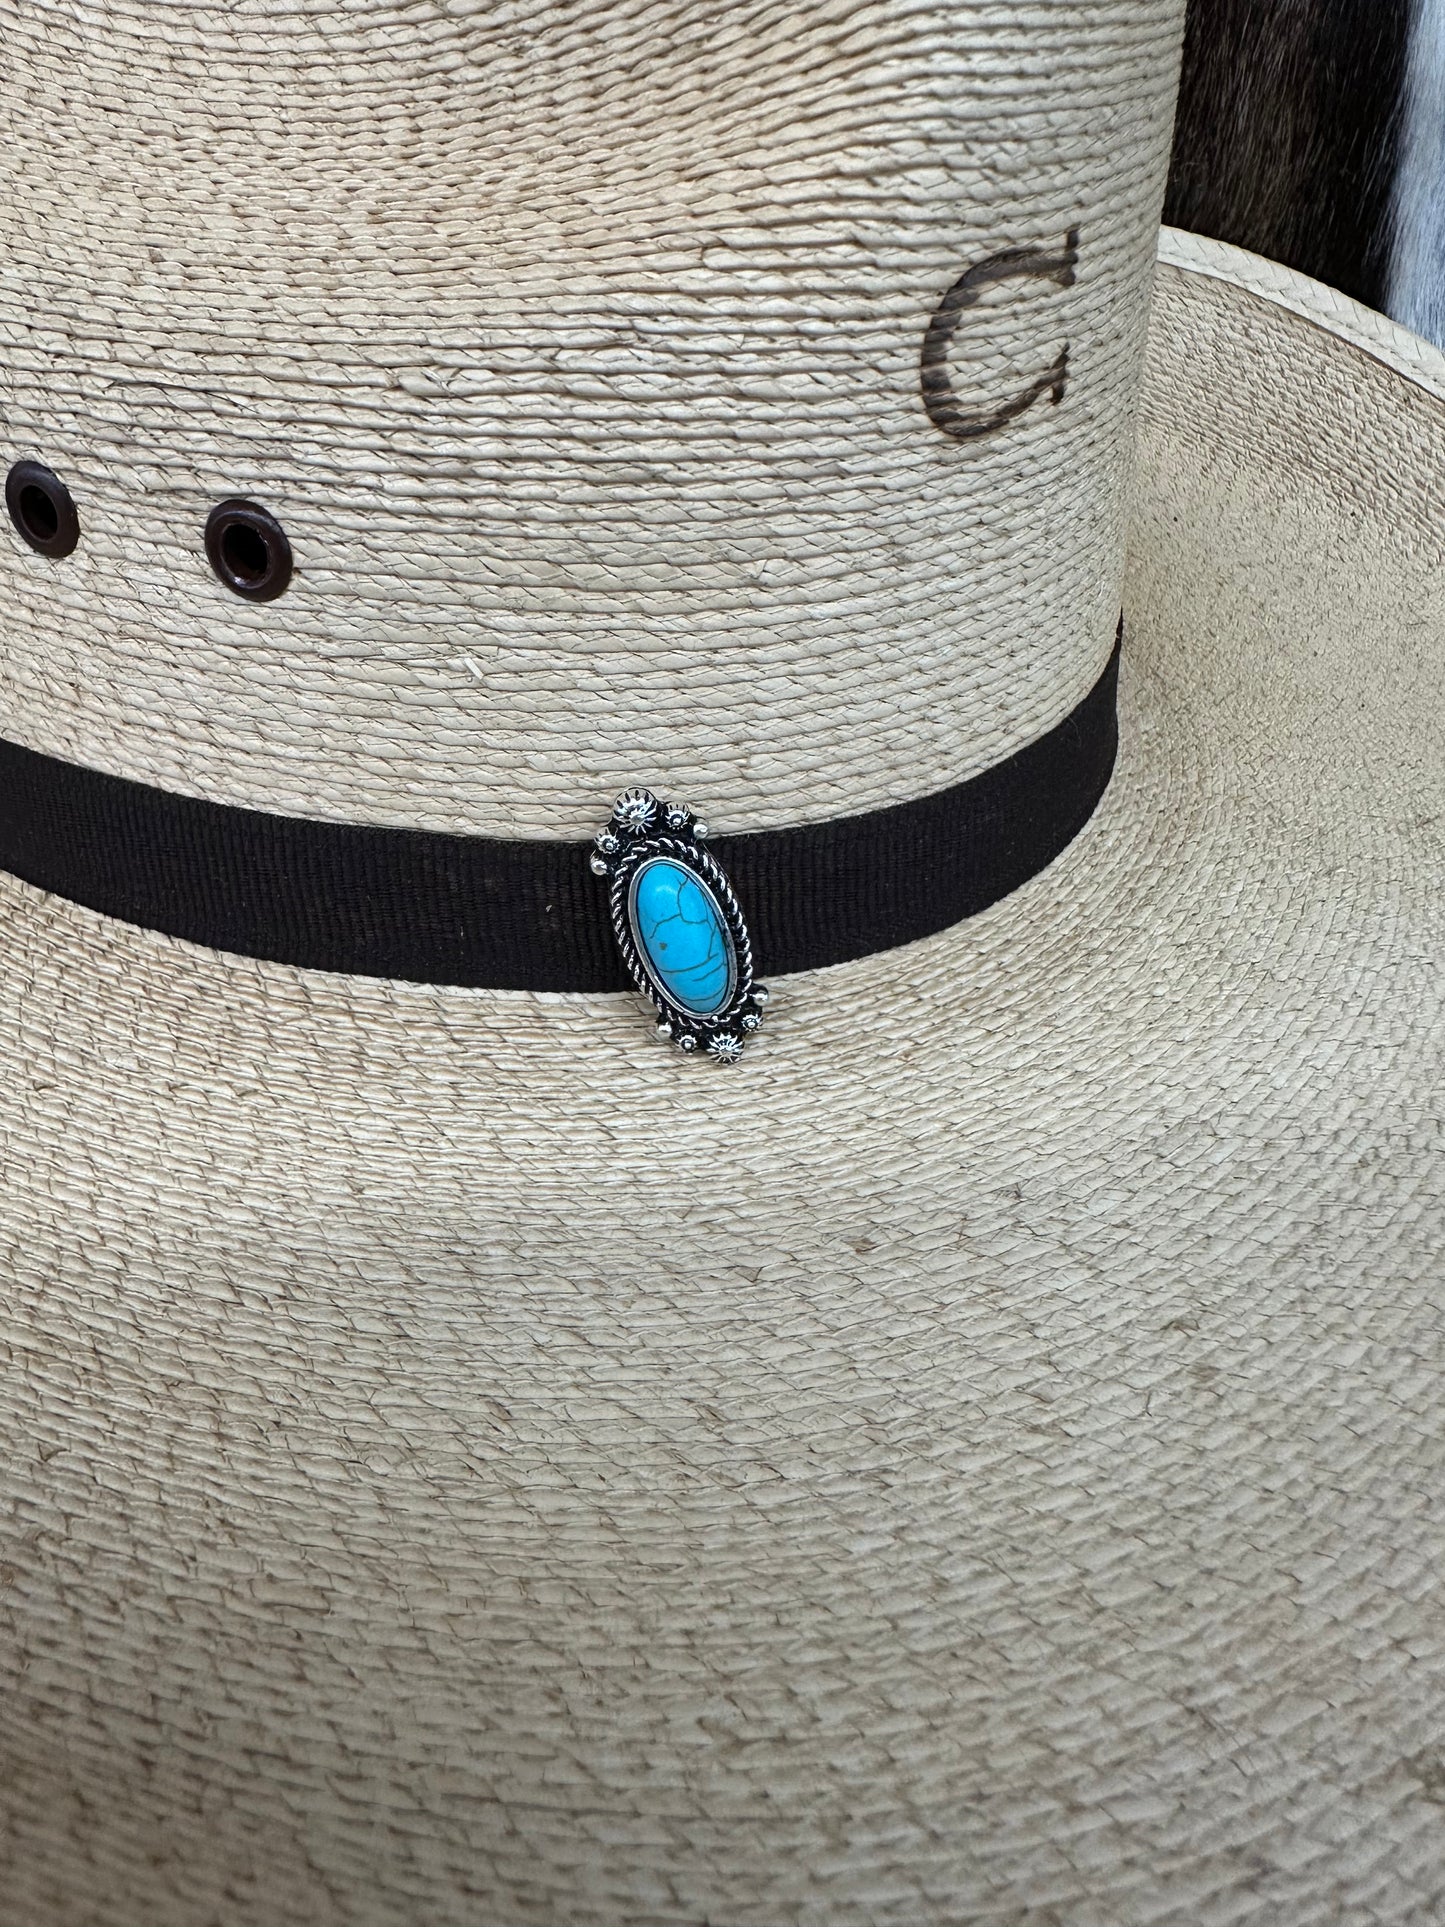 The Fancy Turquoise Hat Pin